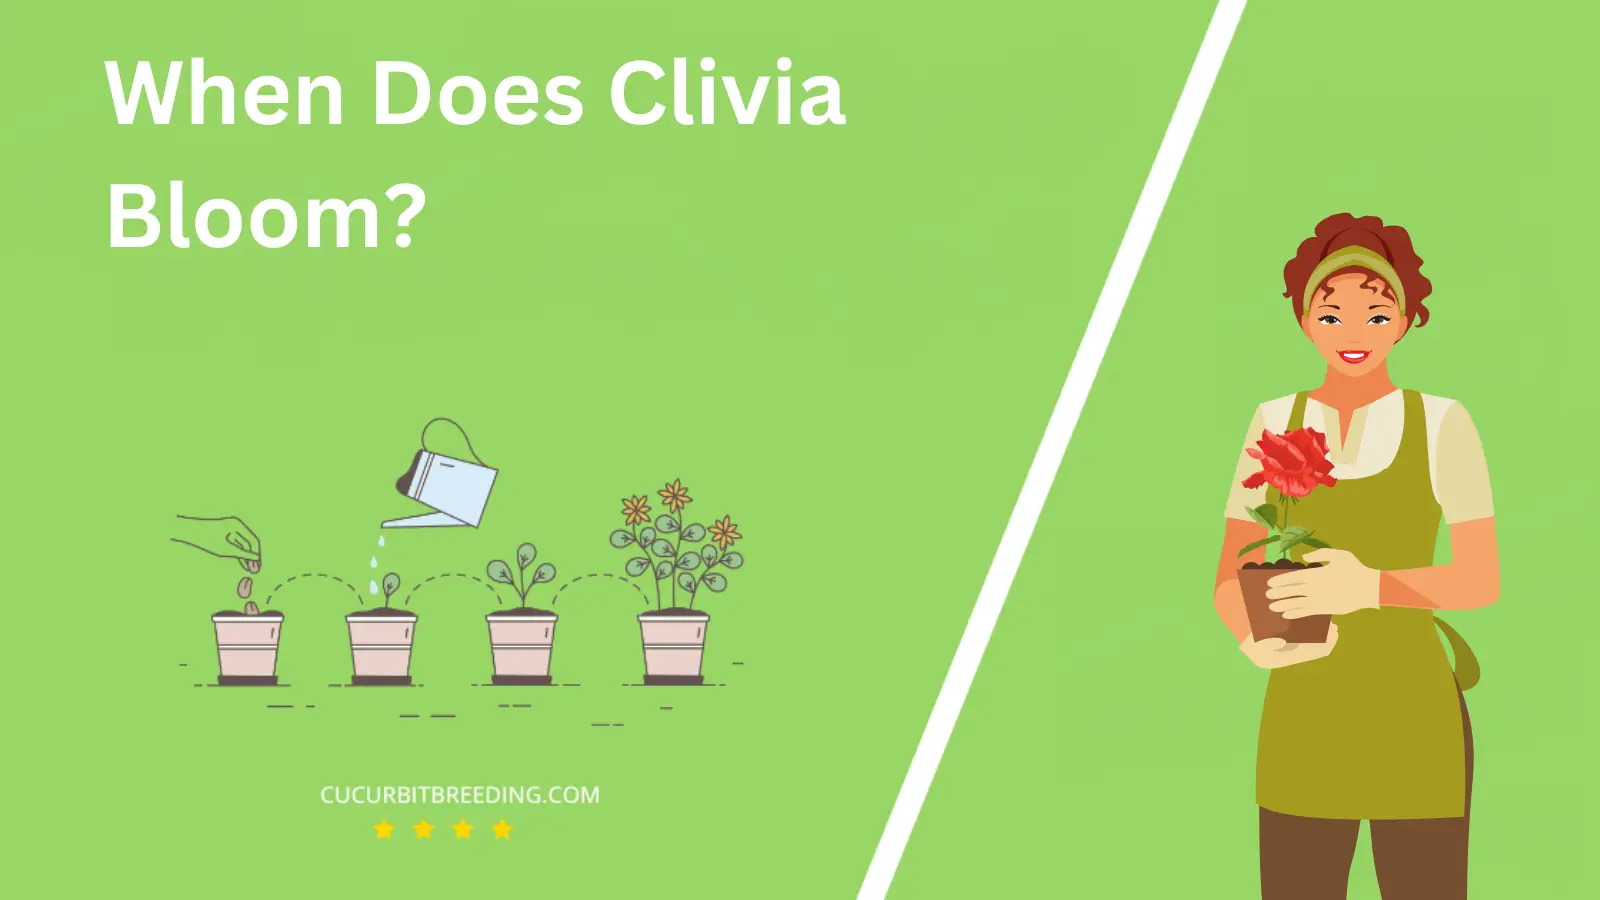 When Does Clivia Bloom?